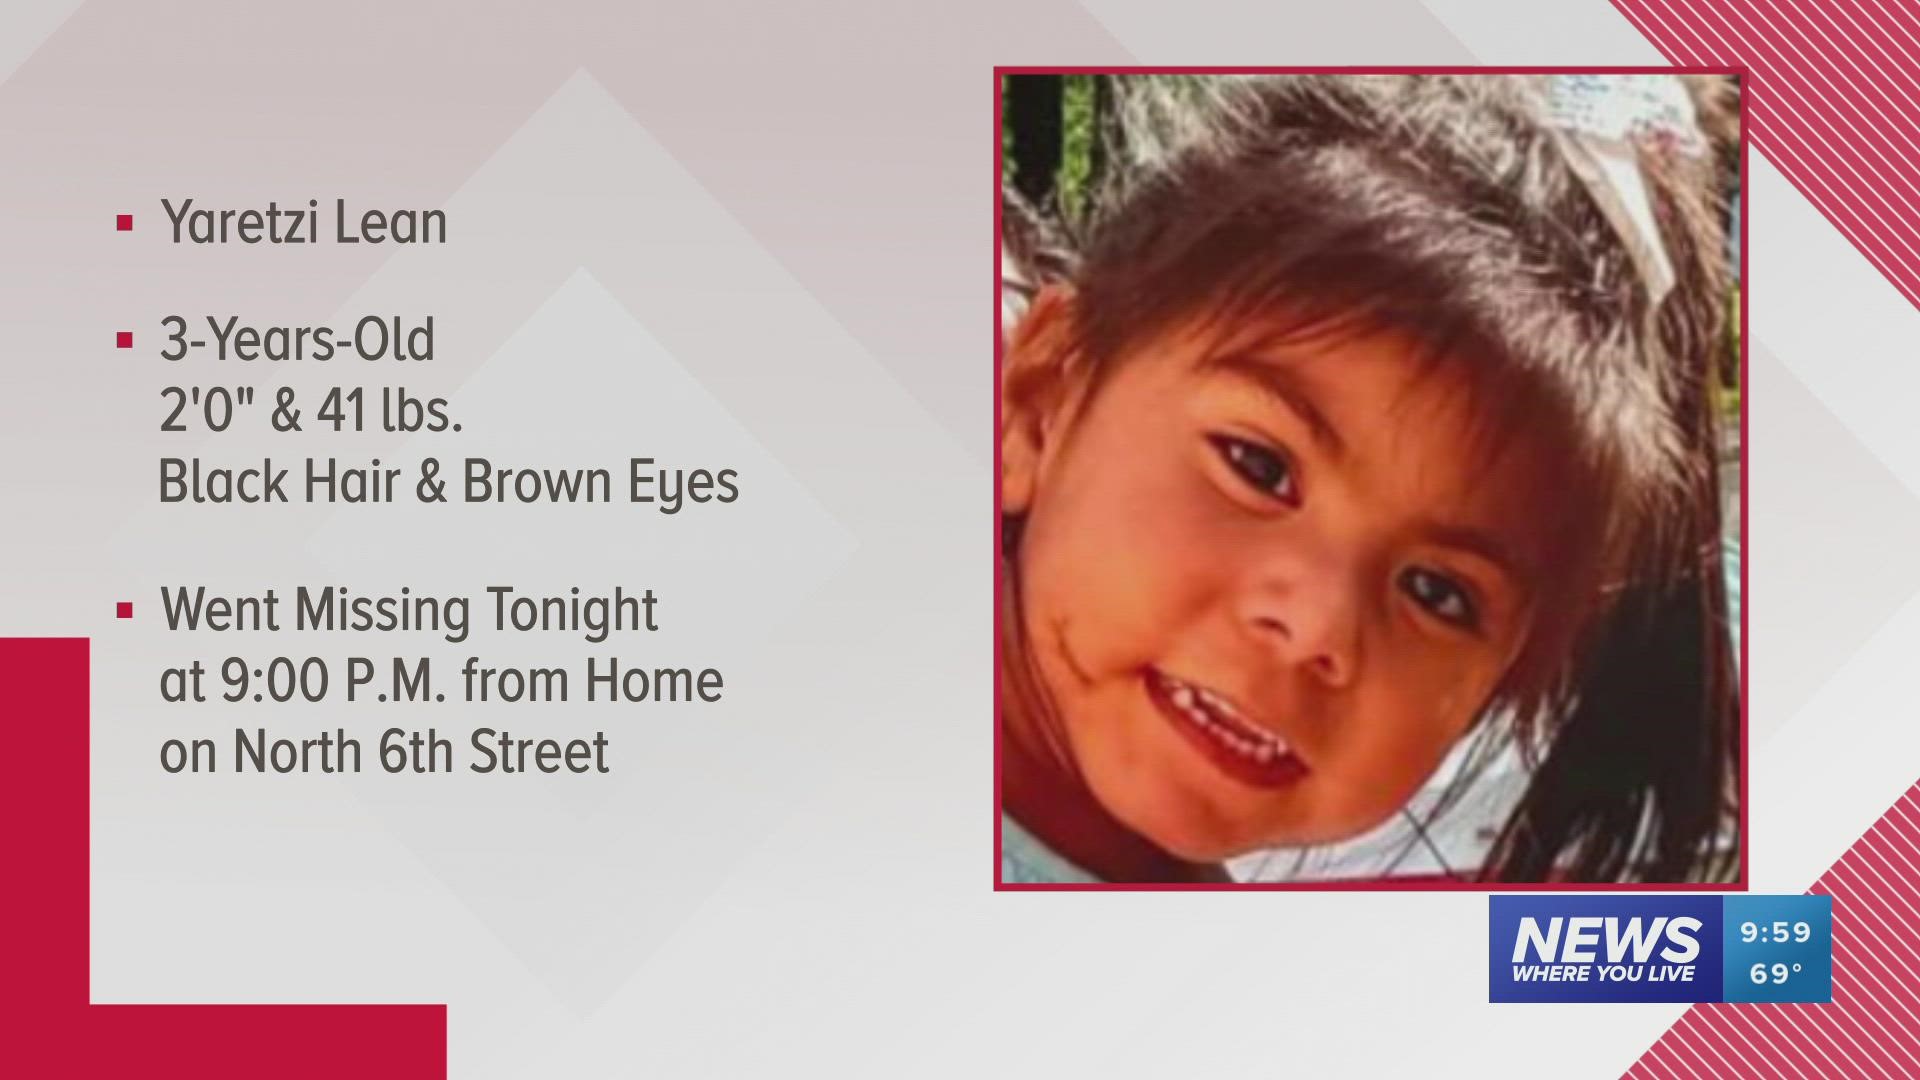 Fort Smith Police are looking for 3-year-old Yaretzi Leal, who reportedly wandered off from her residence in the 3100 block of N 6th Street on Tuesday, May 17.